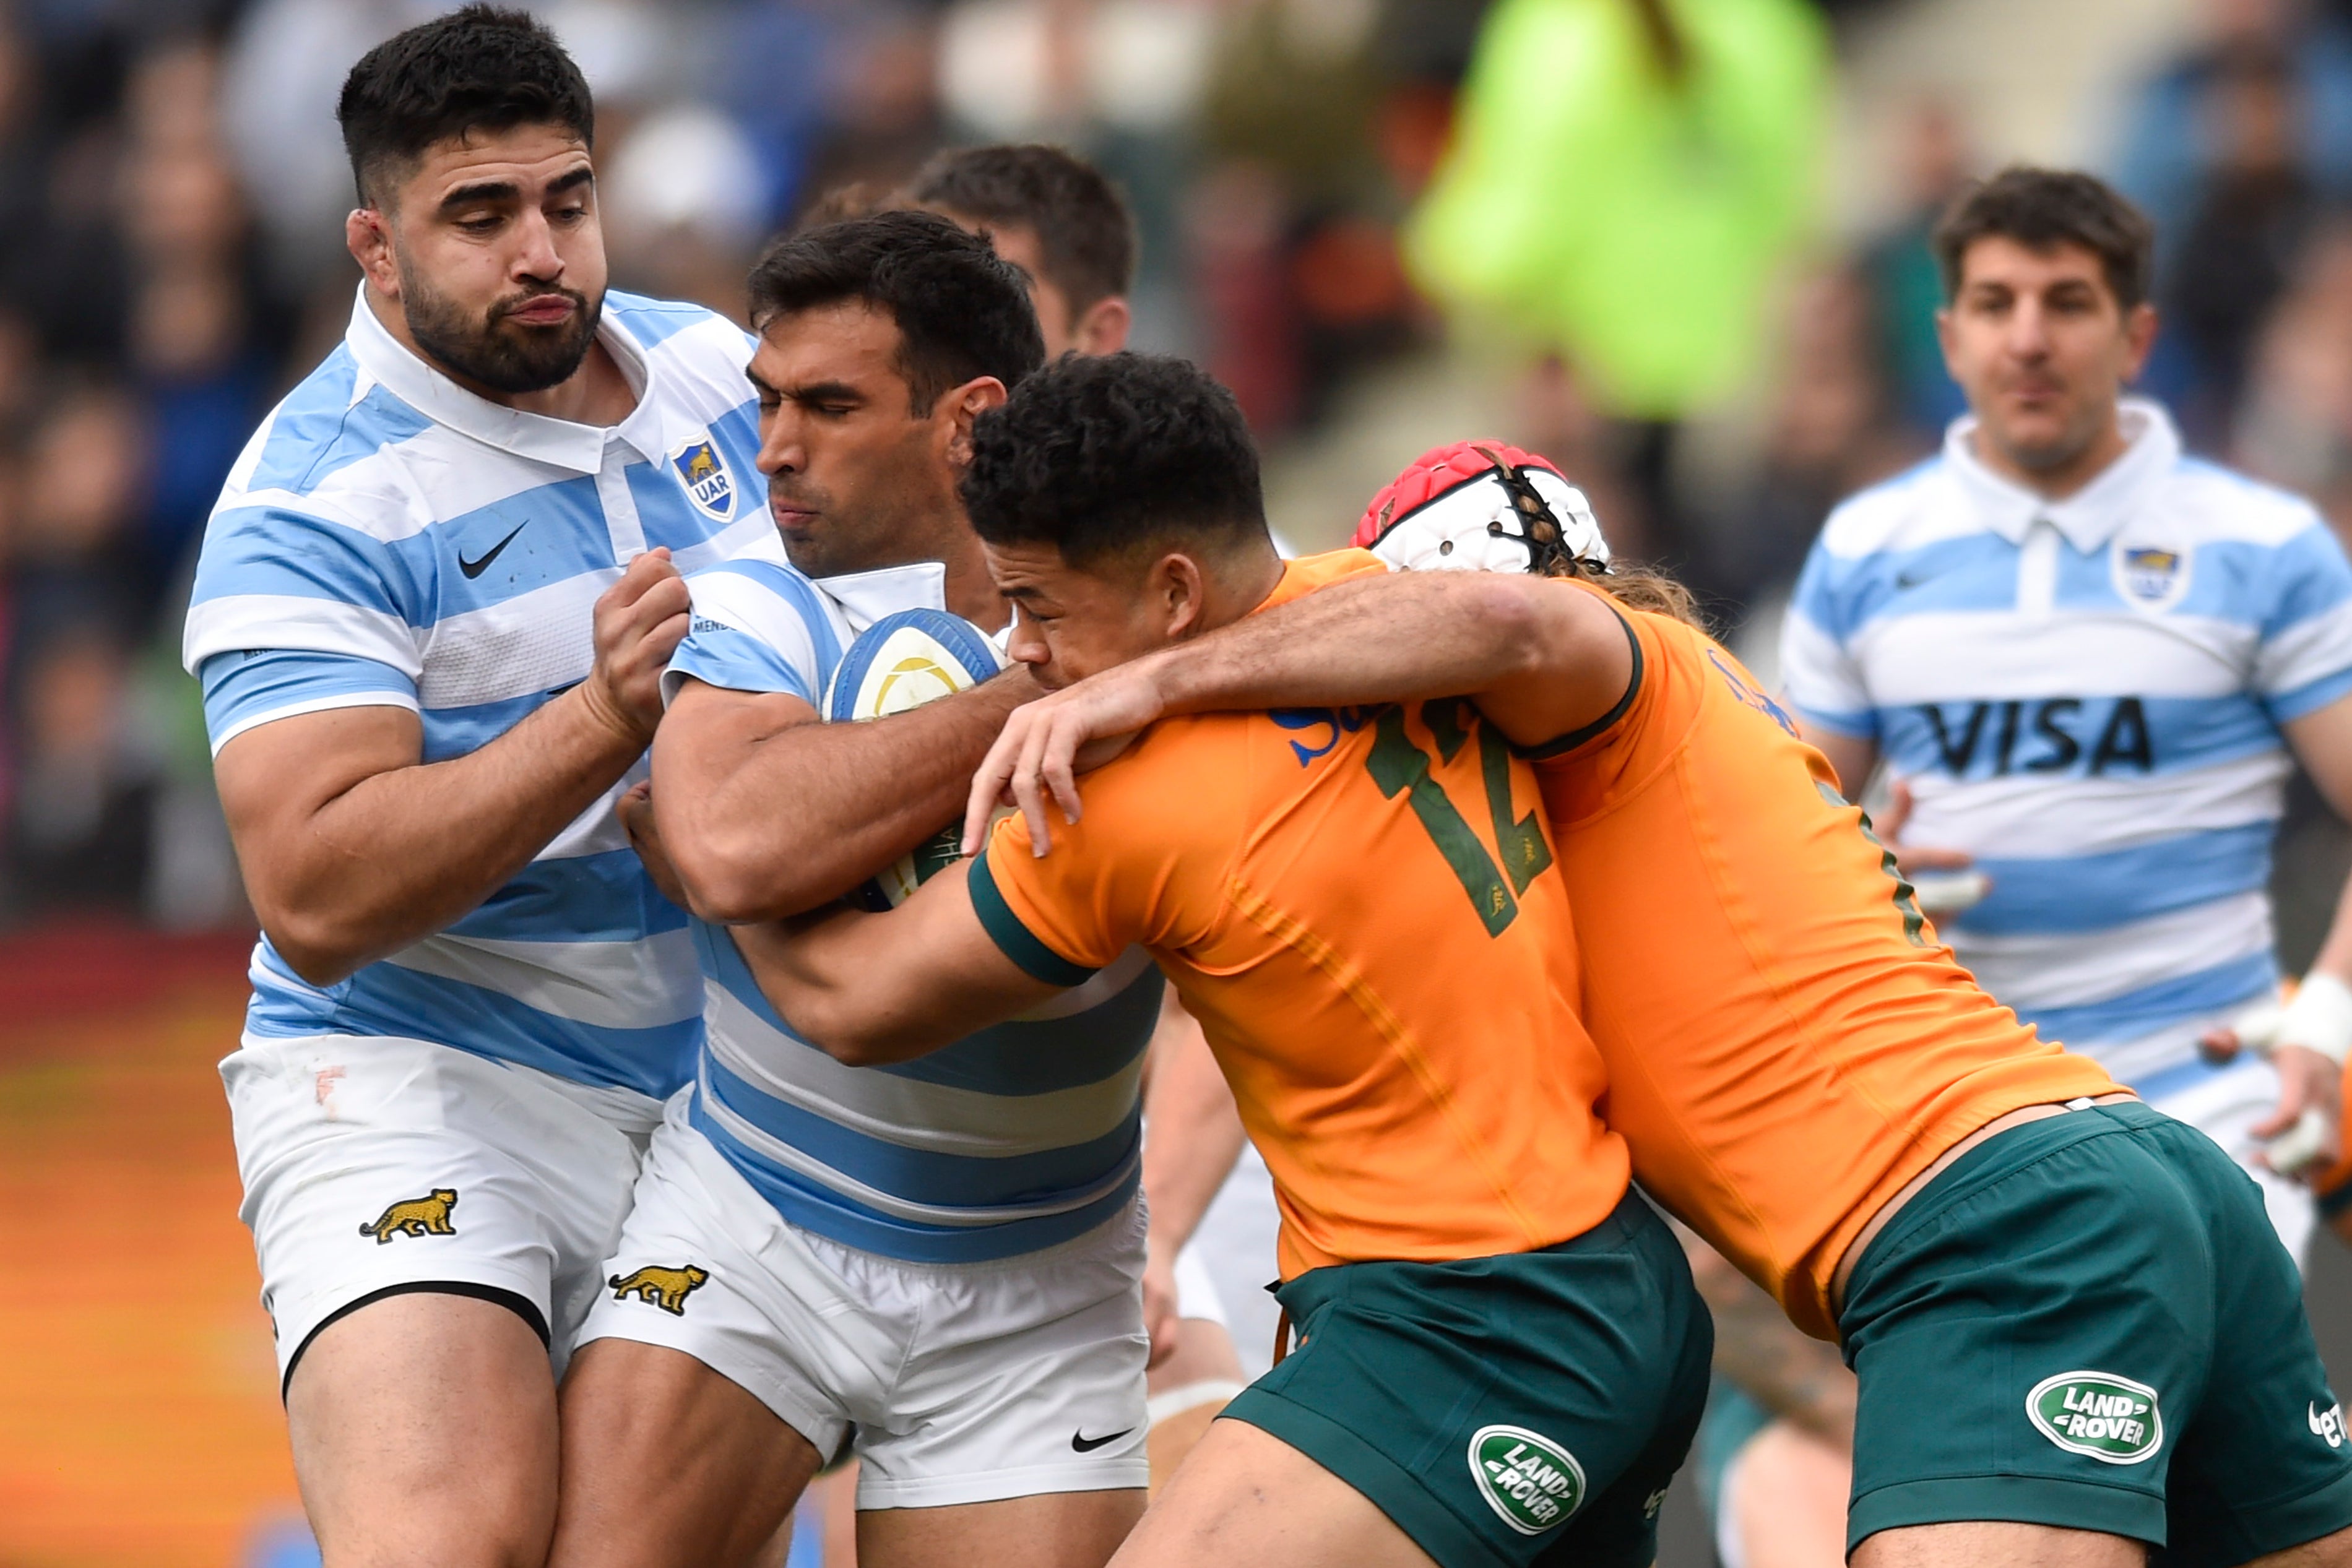 rugby match today live stream